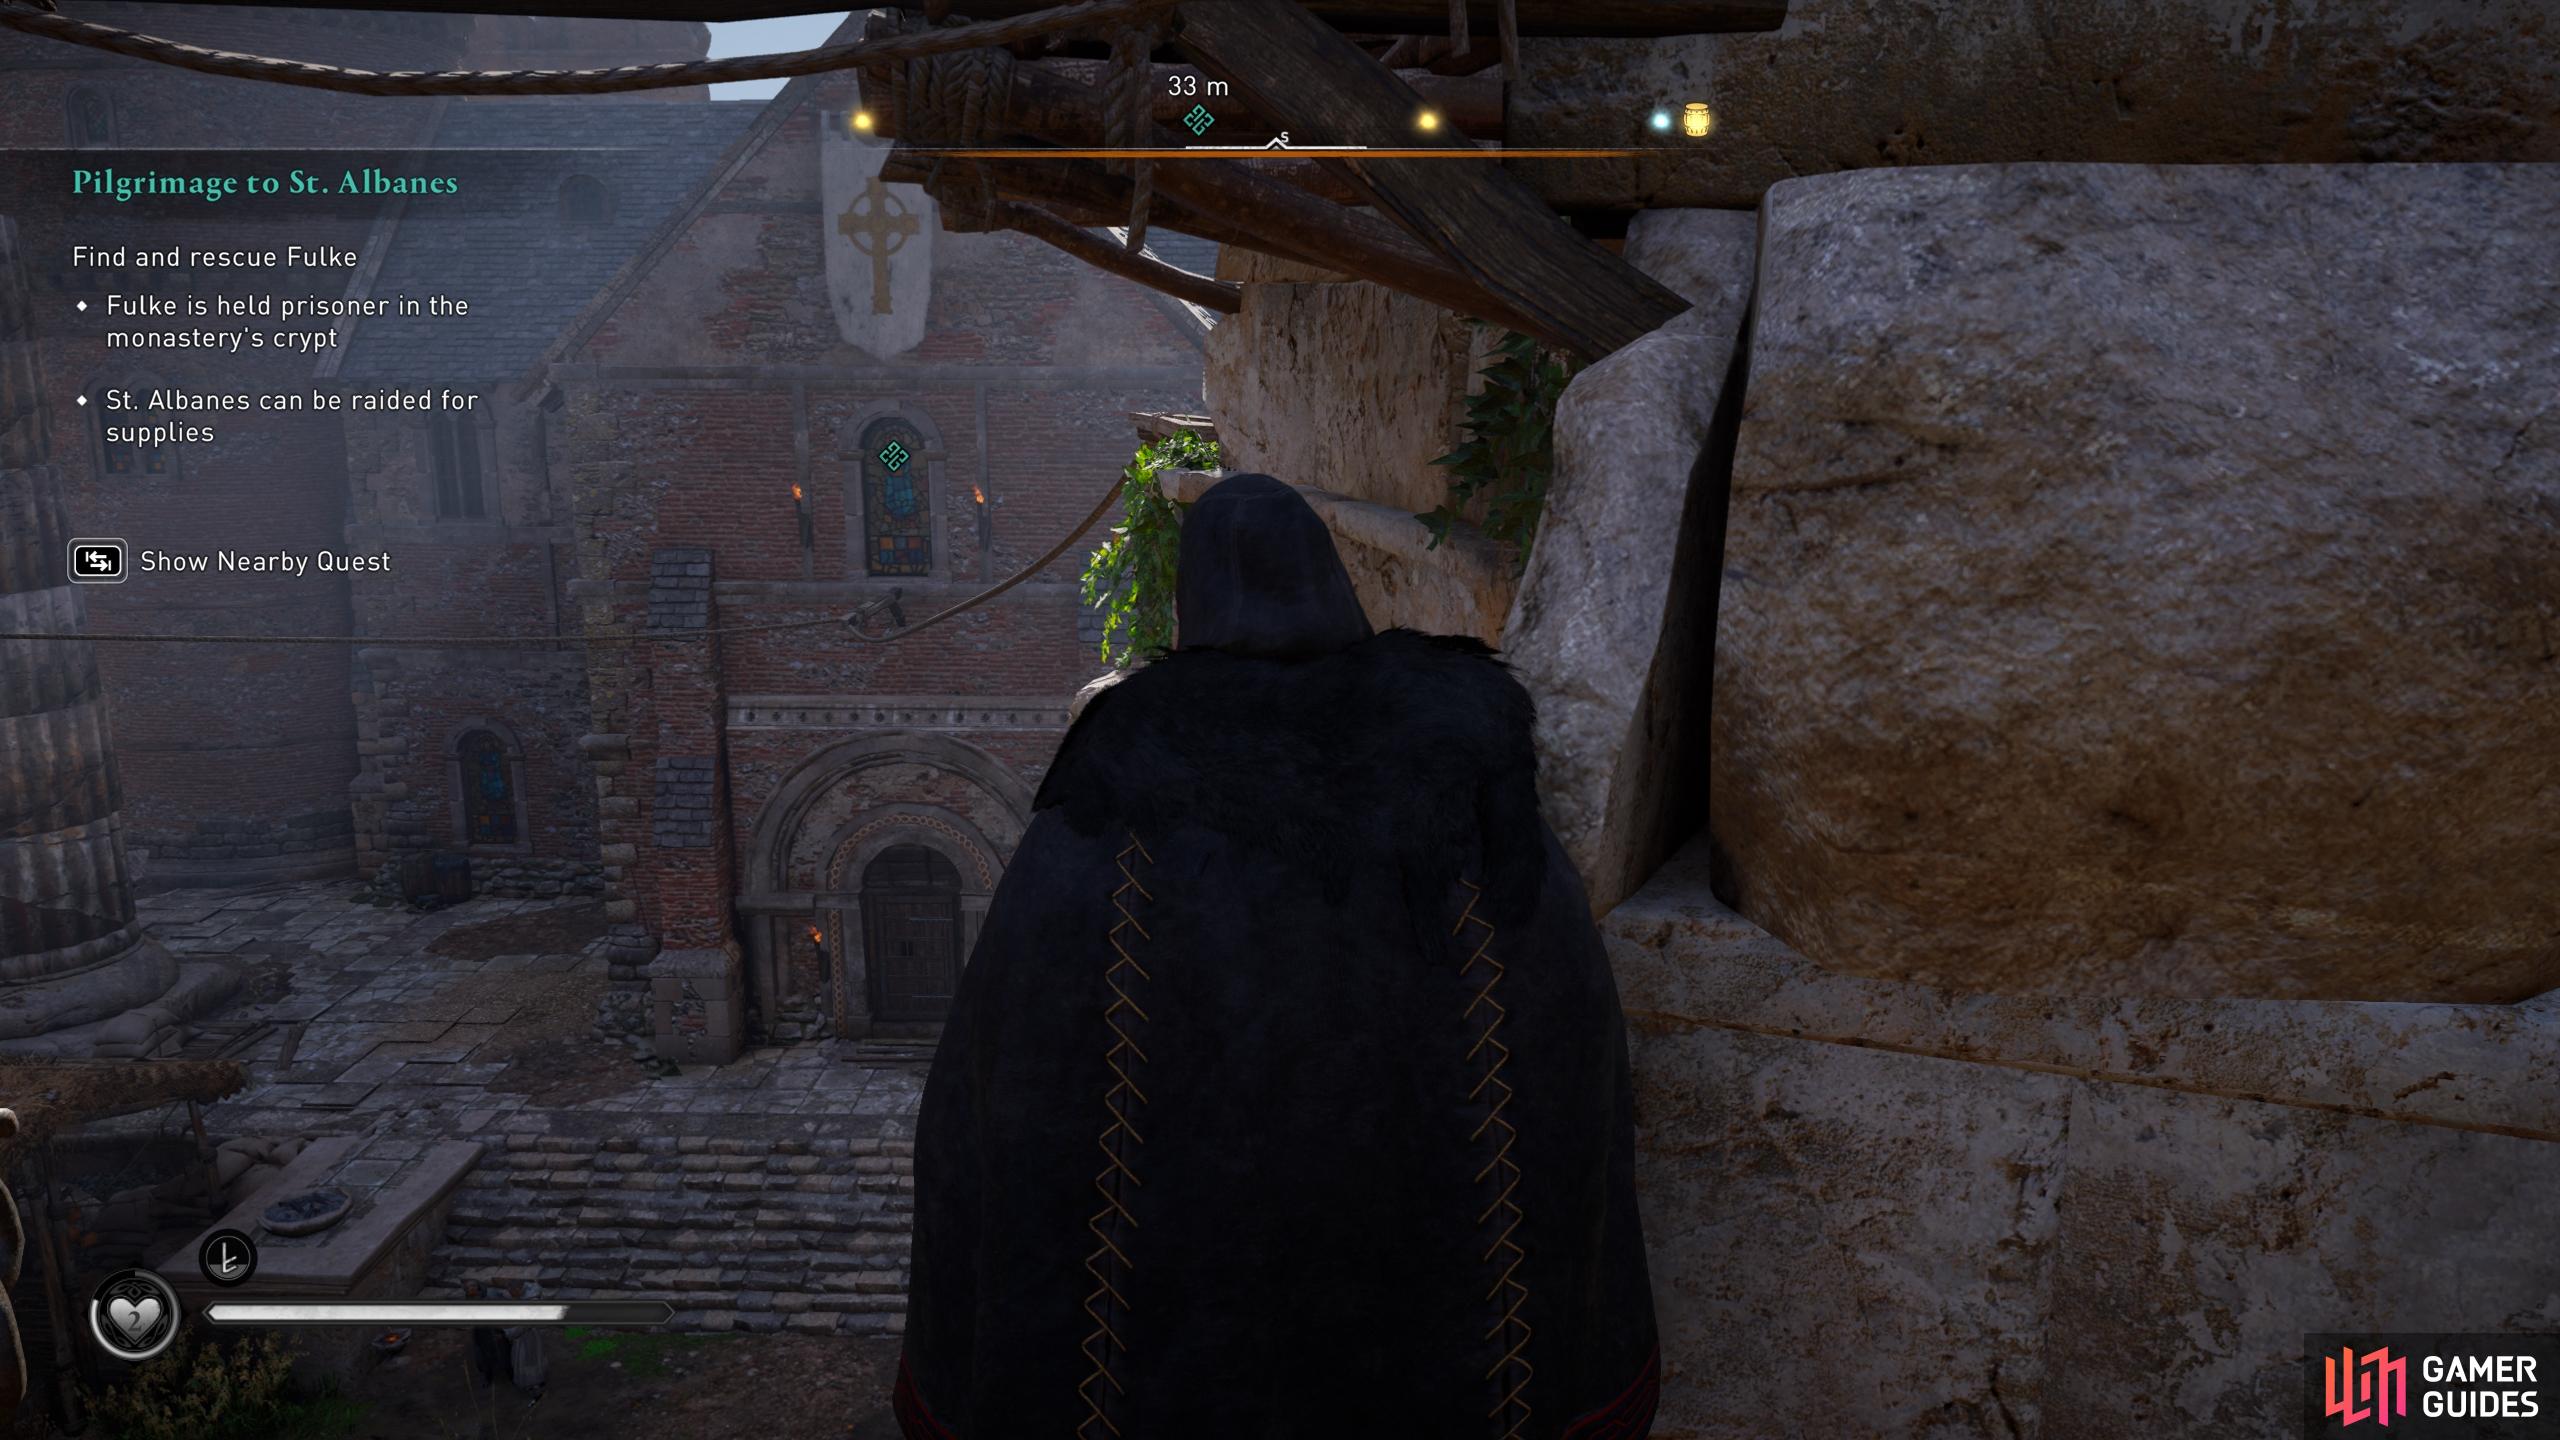 You can shoot the window above the main door of the monastery to enter undetected.